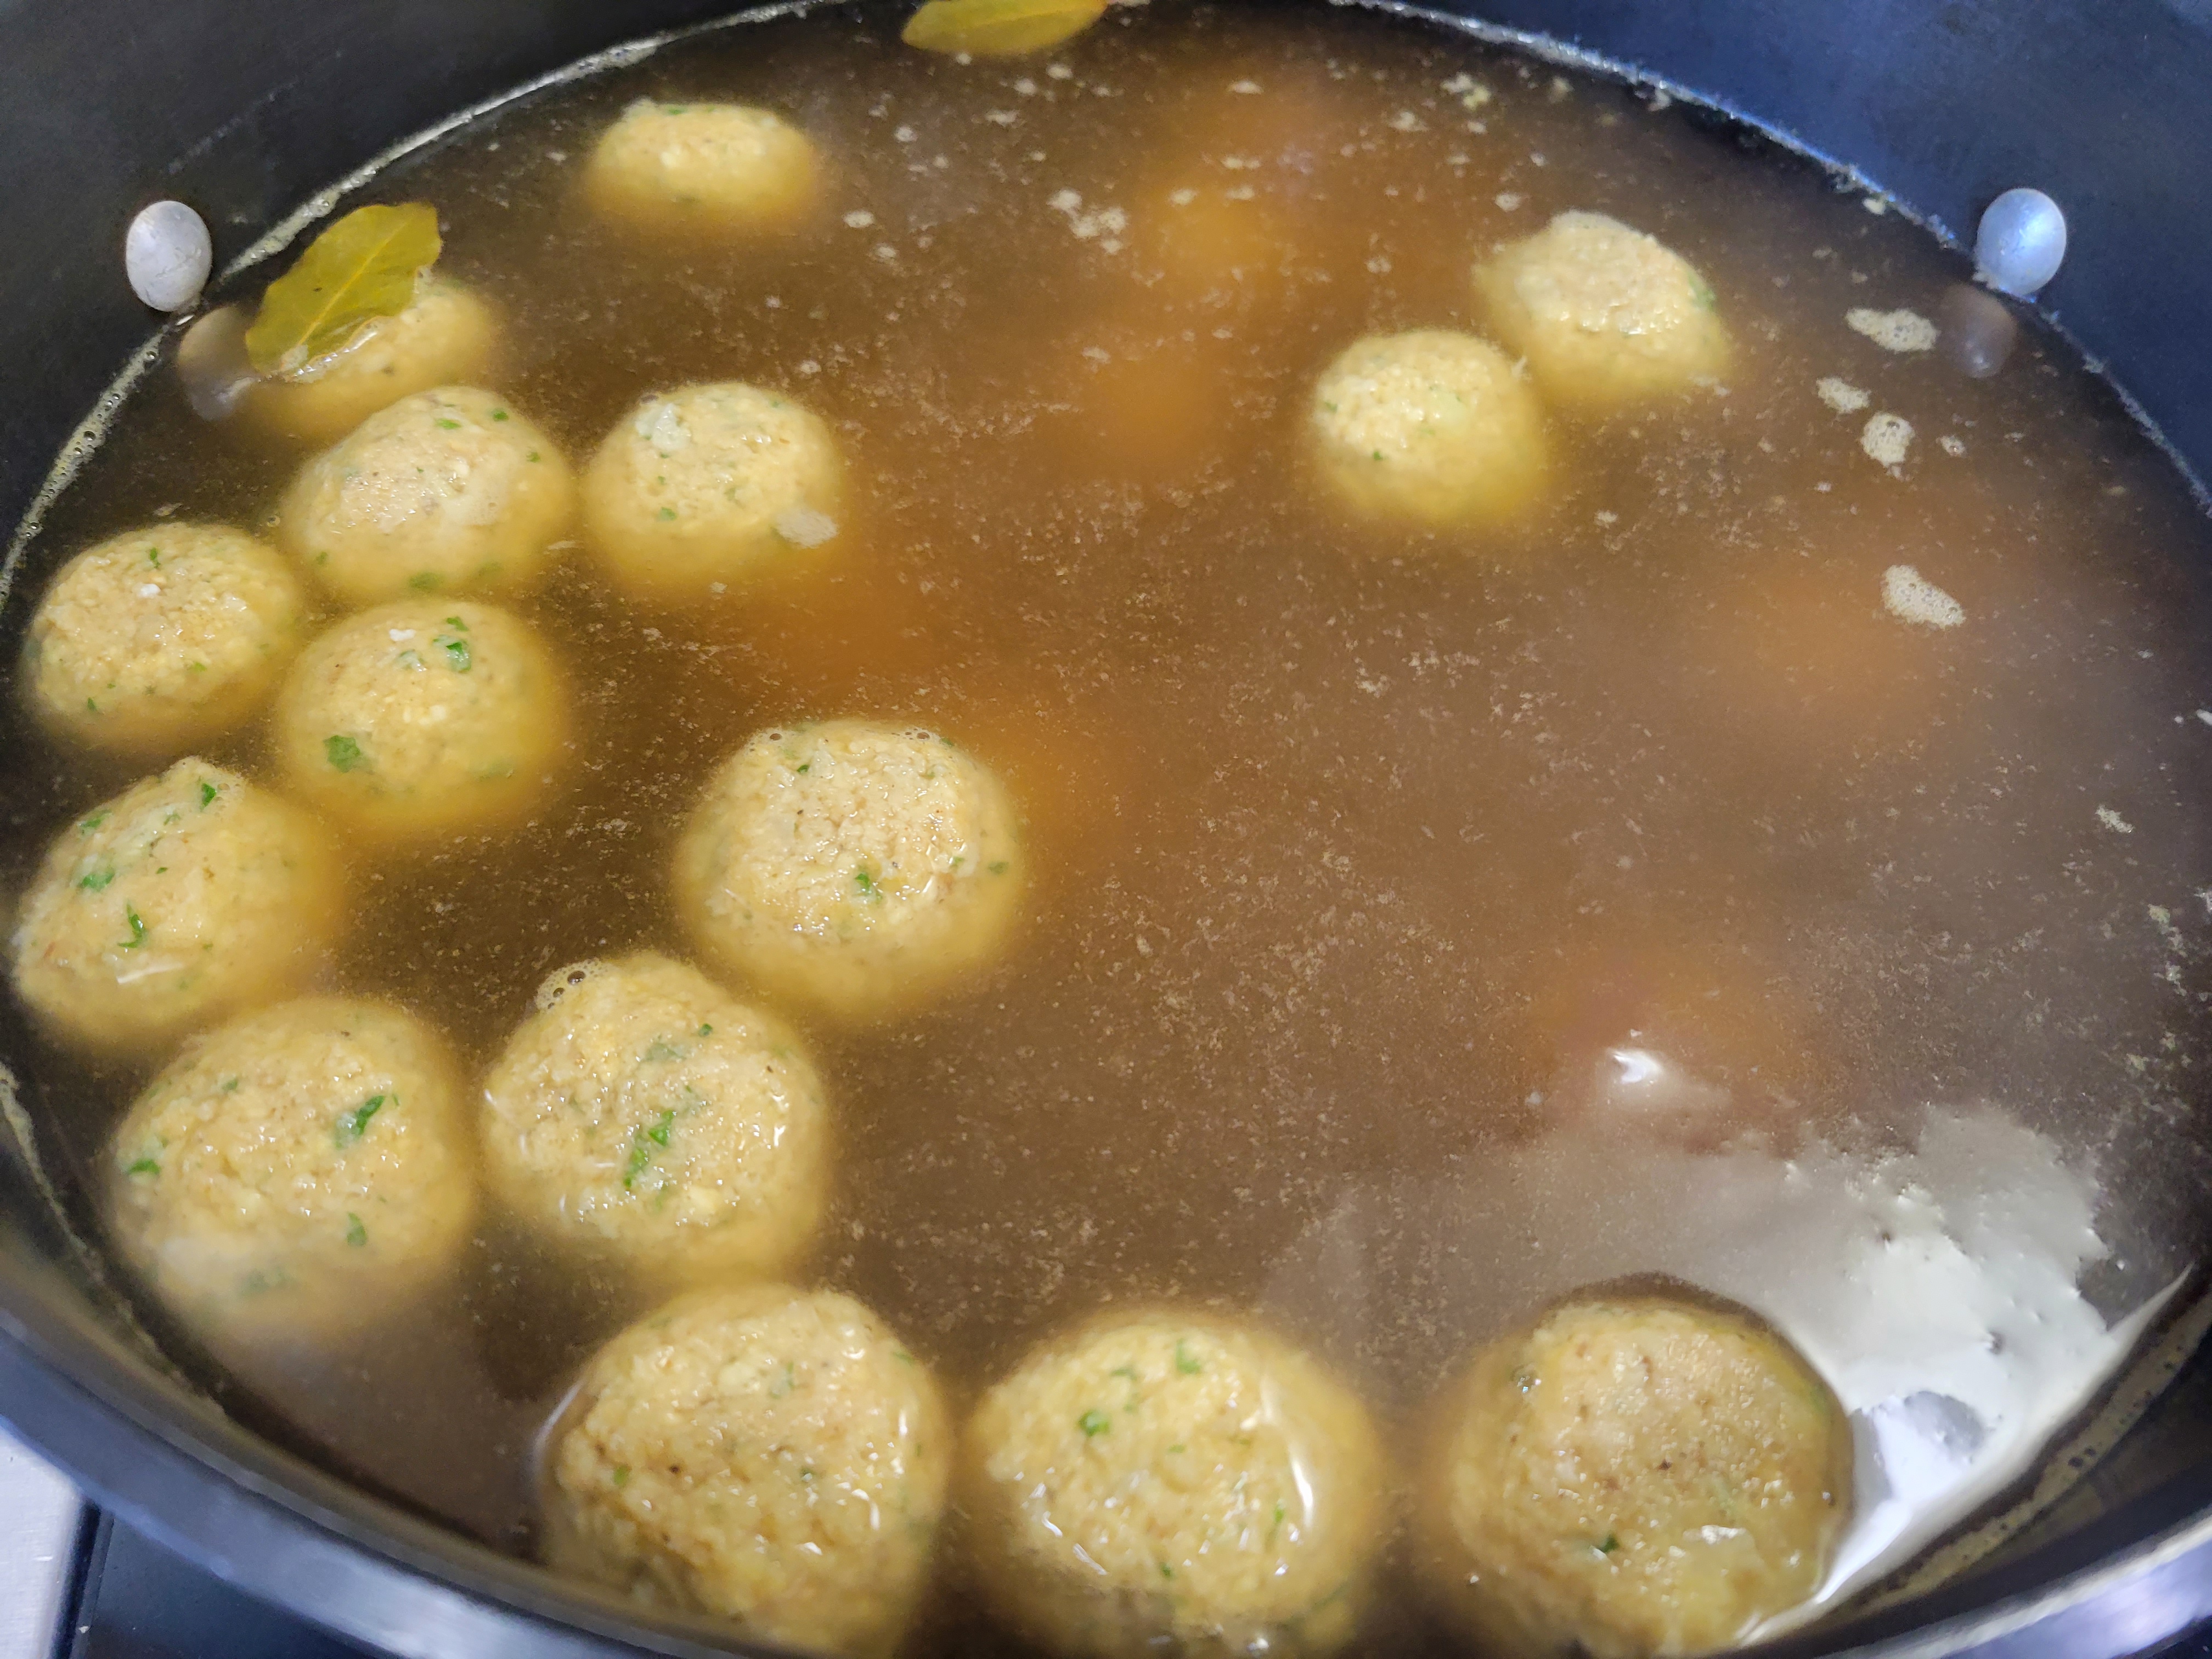 matzoh balls starting to cook in a pot of boiling stock